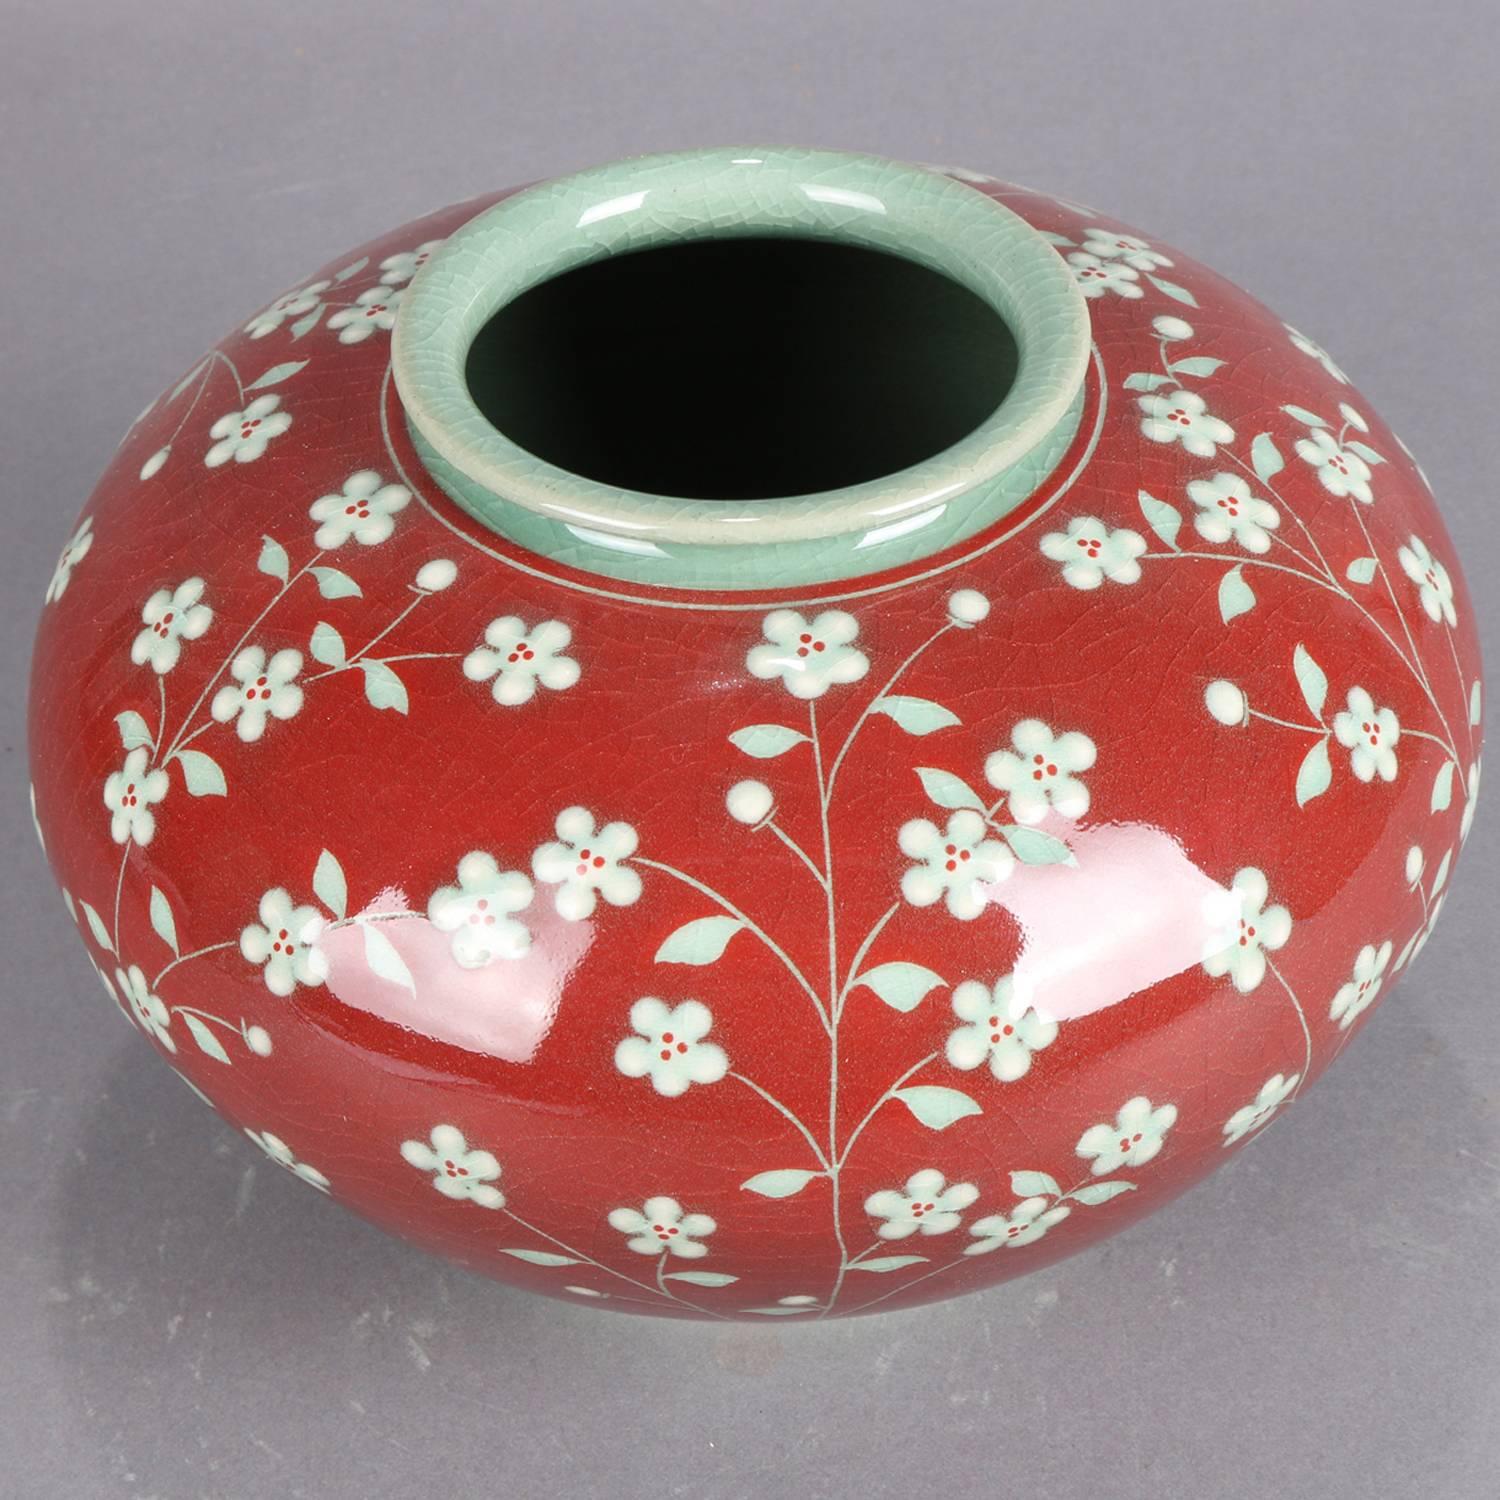 Korean celadon art pottery vase features bulbous form with all-over and raised cherry blossom decoration on Vermillion ground, chop mark signed and stamped on base, 20th century

Measures: 6